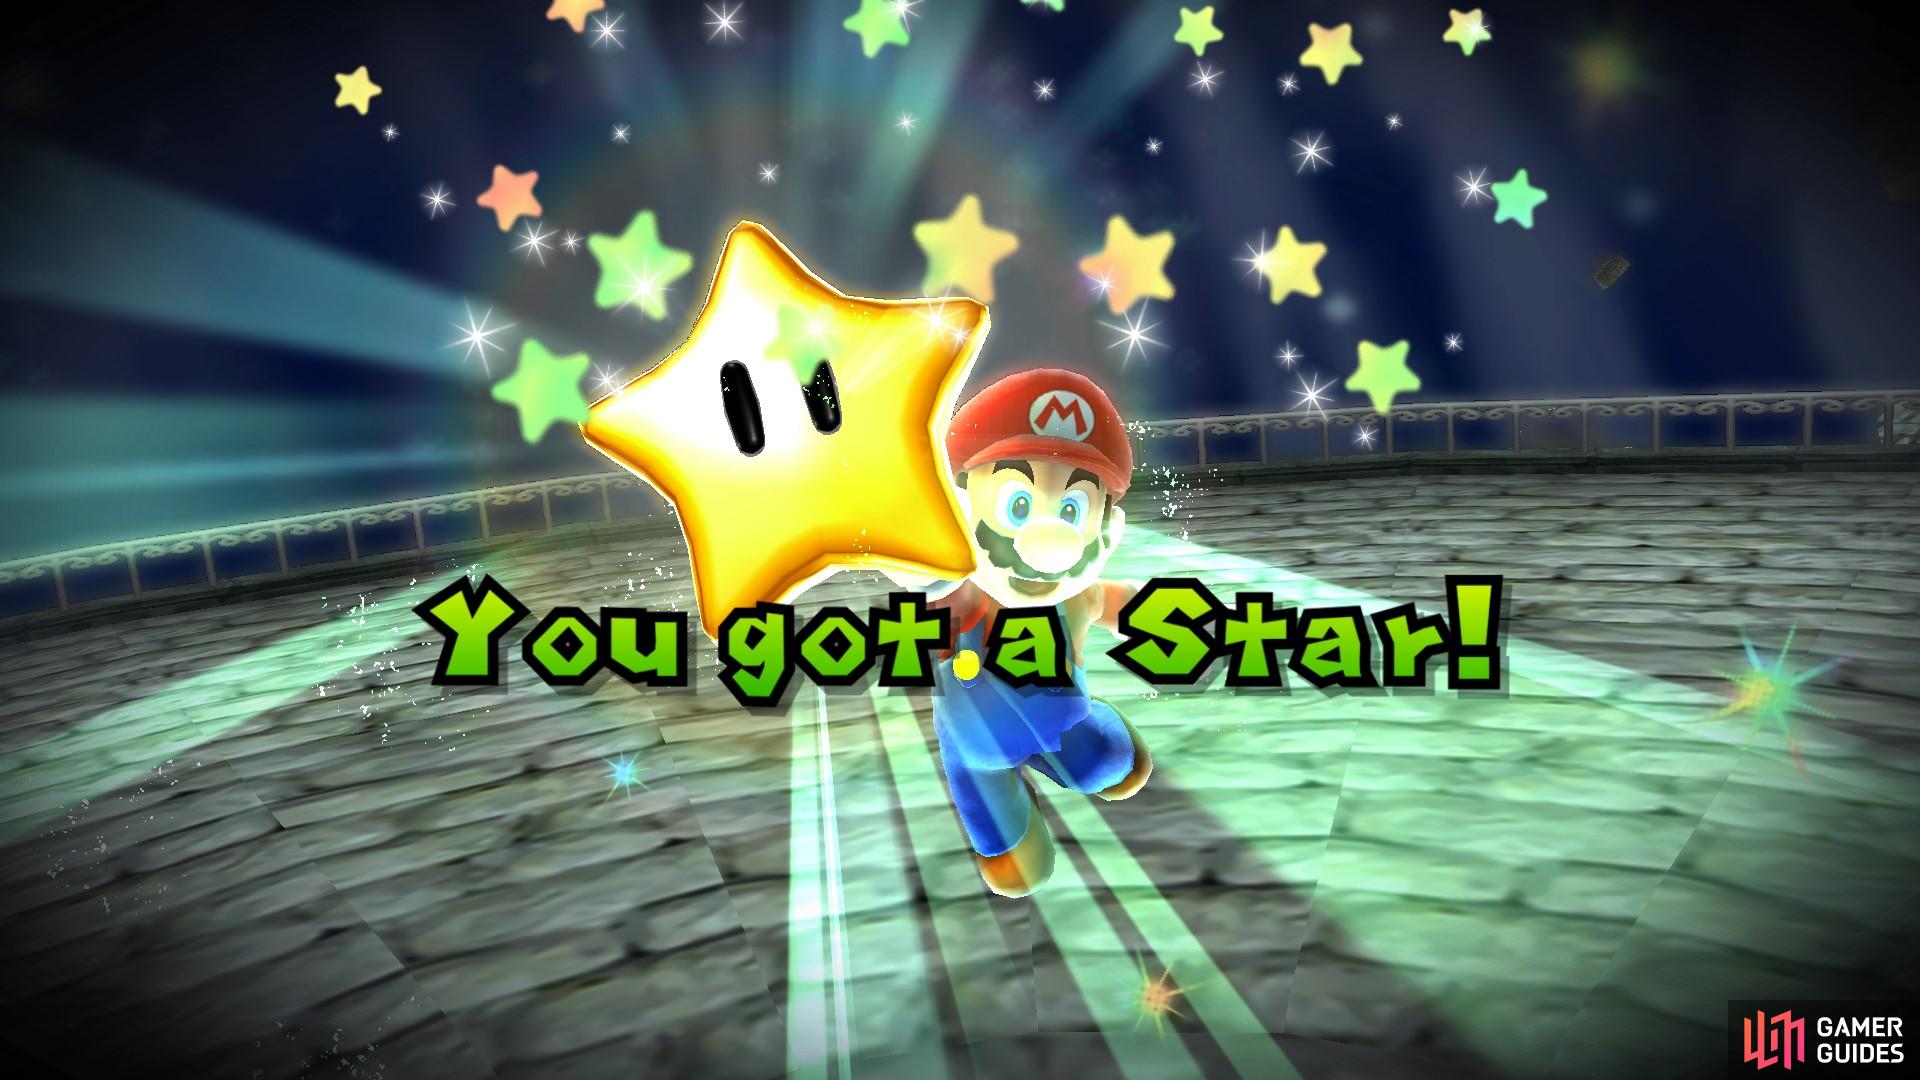 If you succeed in taking no damage and defeating the boss, you get a Star!